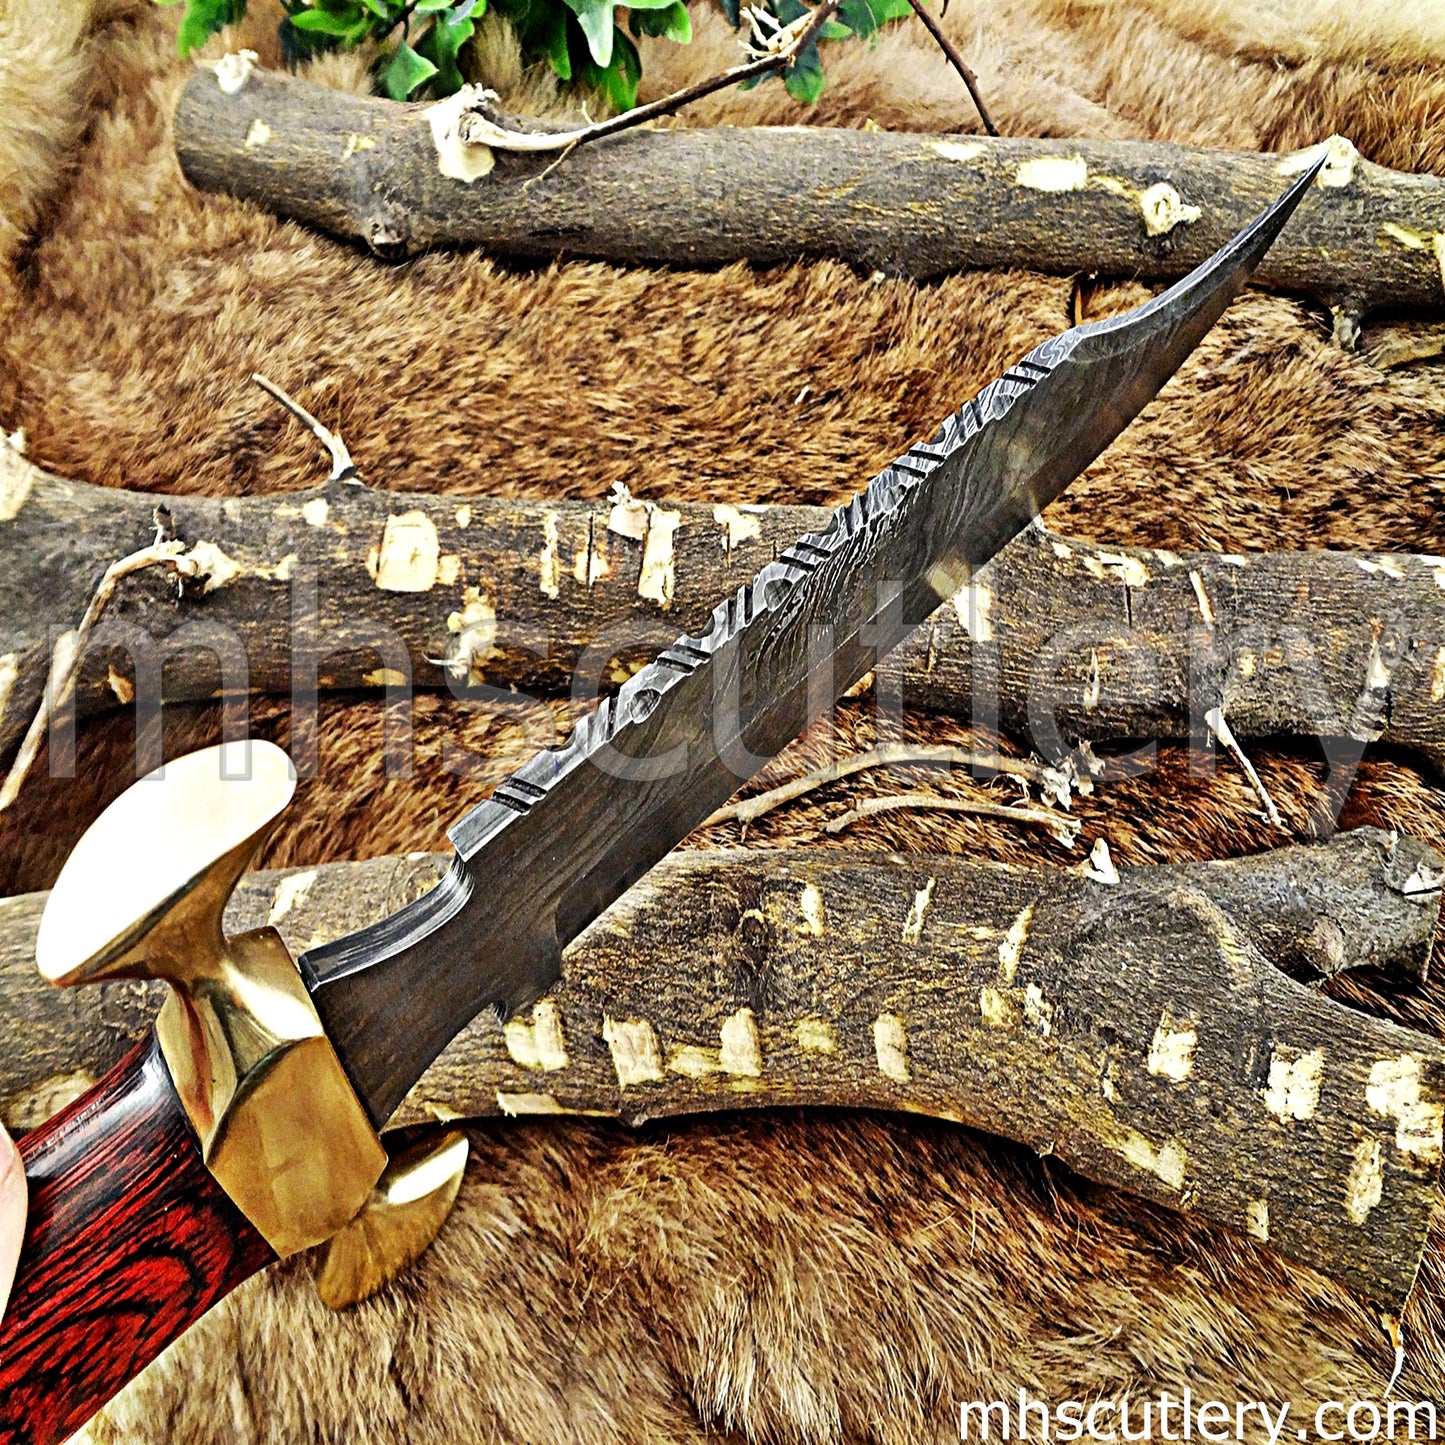 Damascus Steel Bowie Knife / Red Handle | mhscutlery